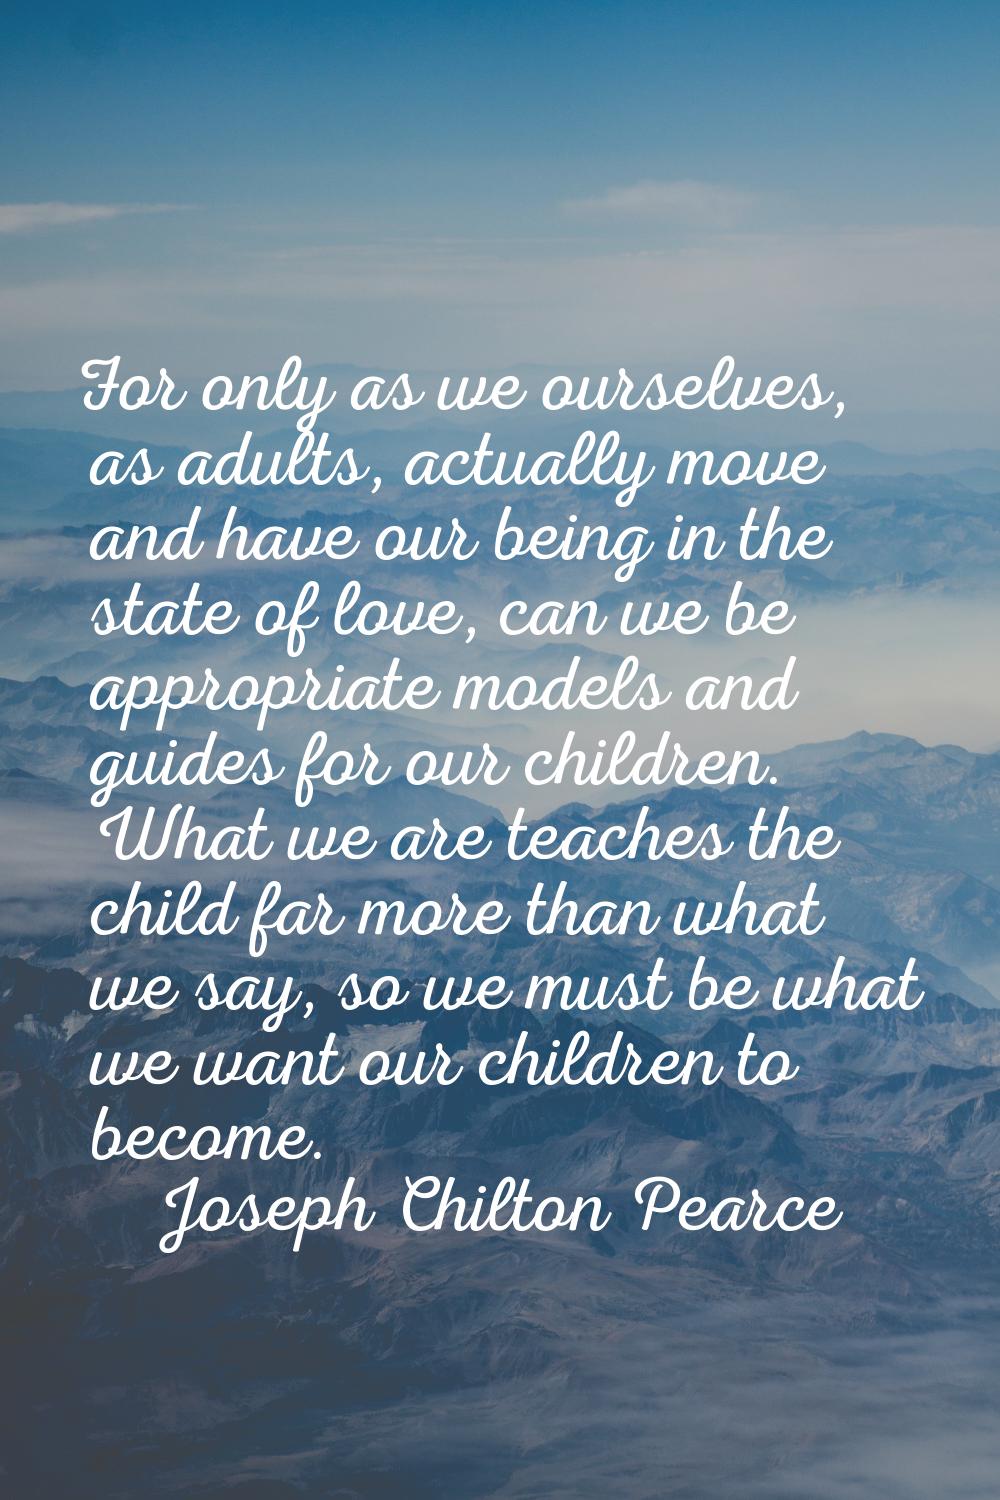 For only as we ourselves, as adults, actually move and have our being in the state of love, can we 